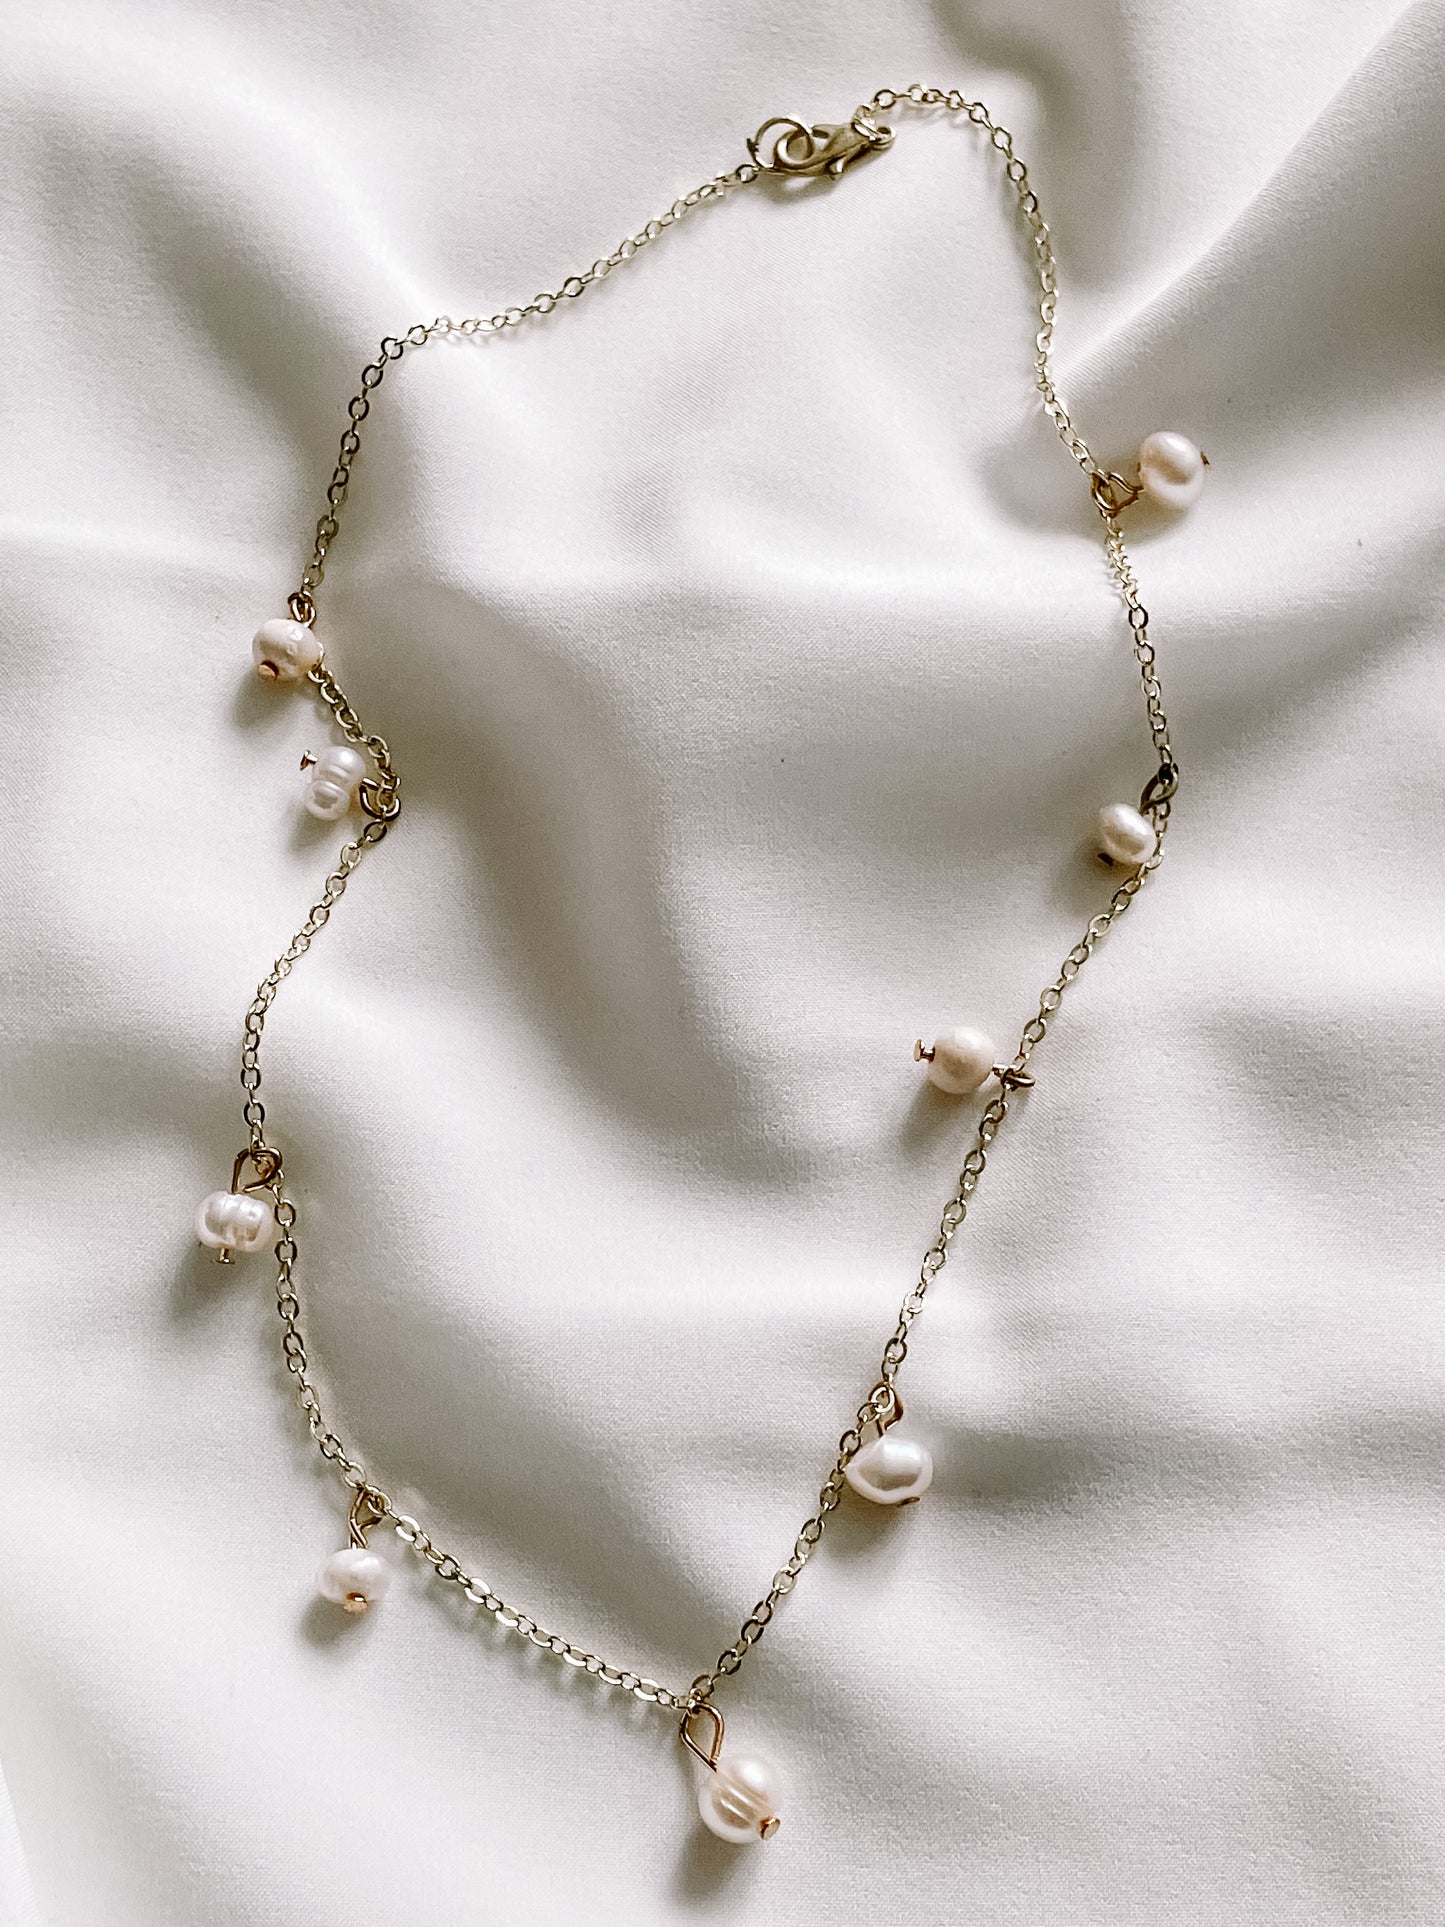 Crown of pearls necklace